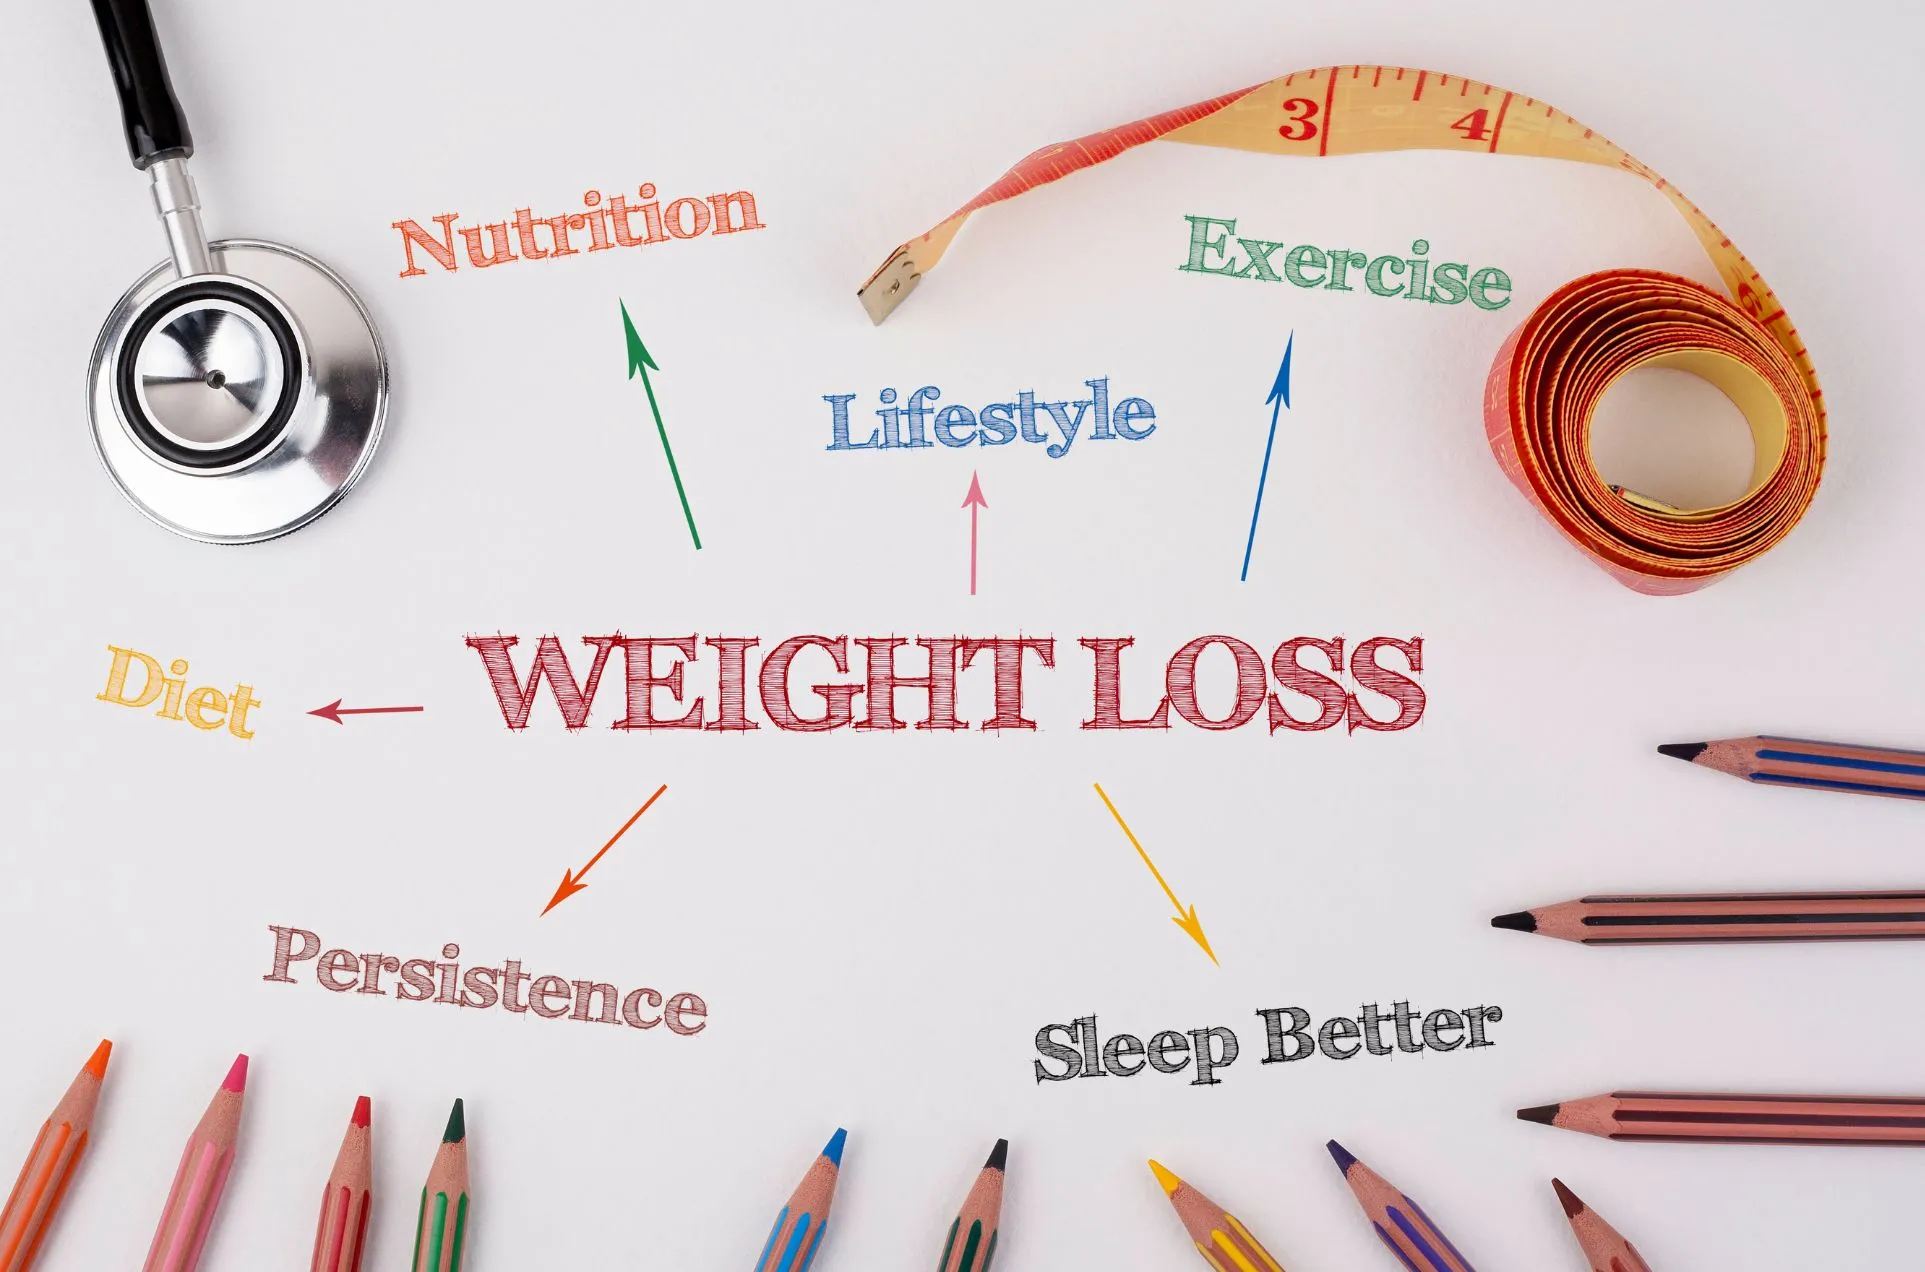 Sustainable Weight Loss